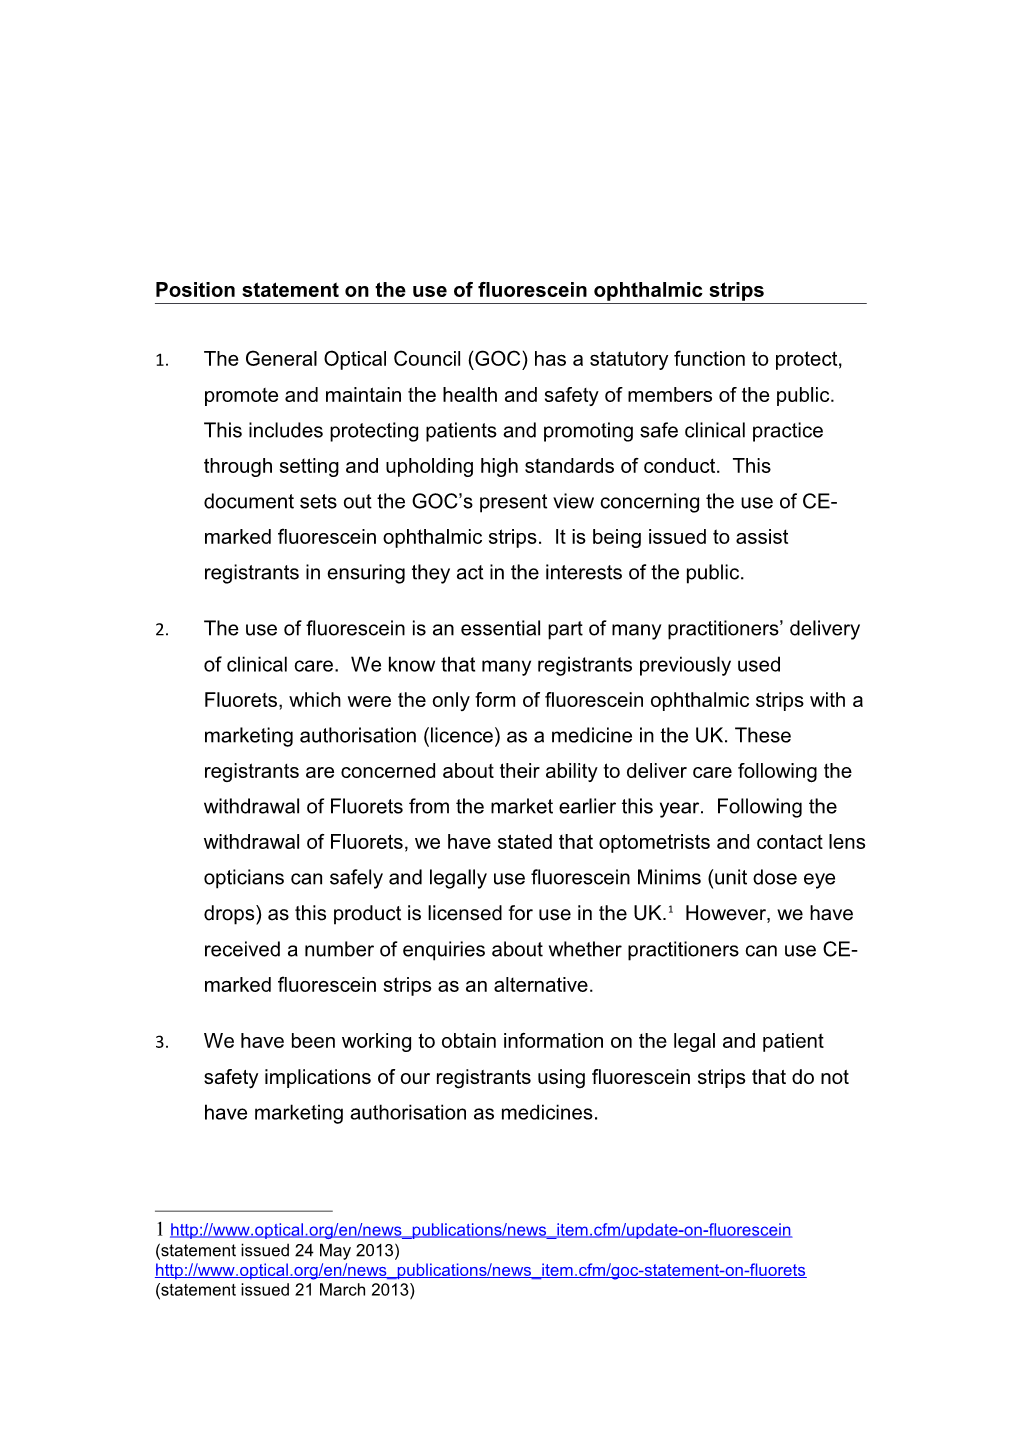 Position Statement on the Use of Fluorescein Ophthalmic Strips